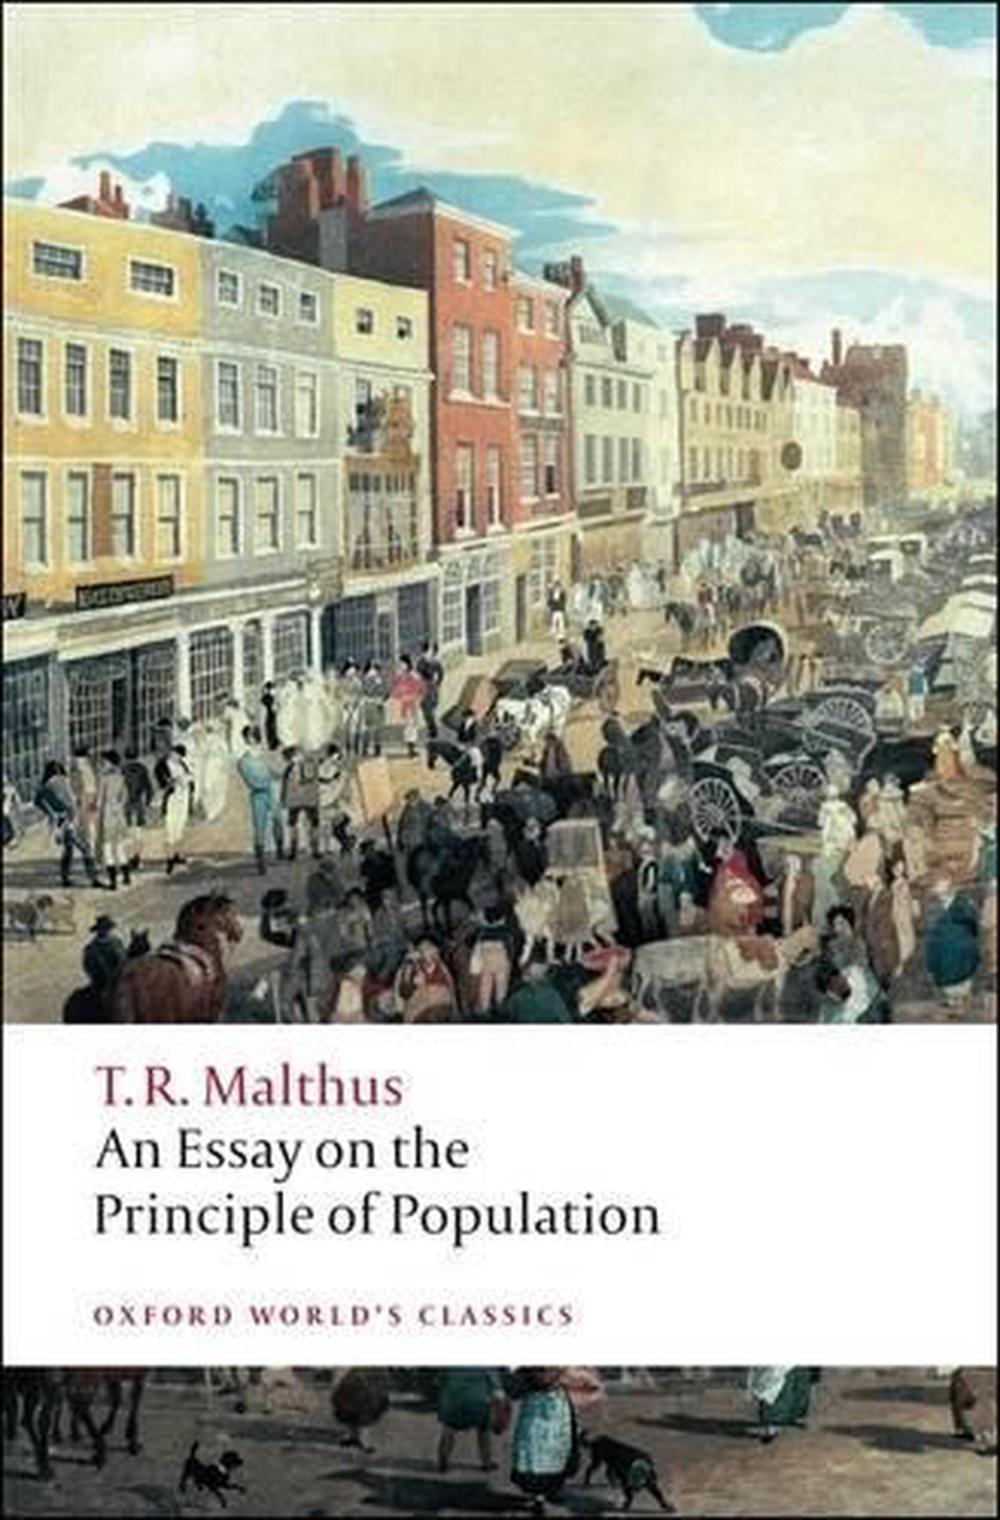 who is the writer of essay on population